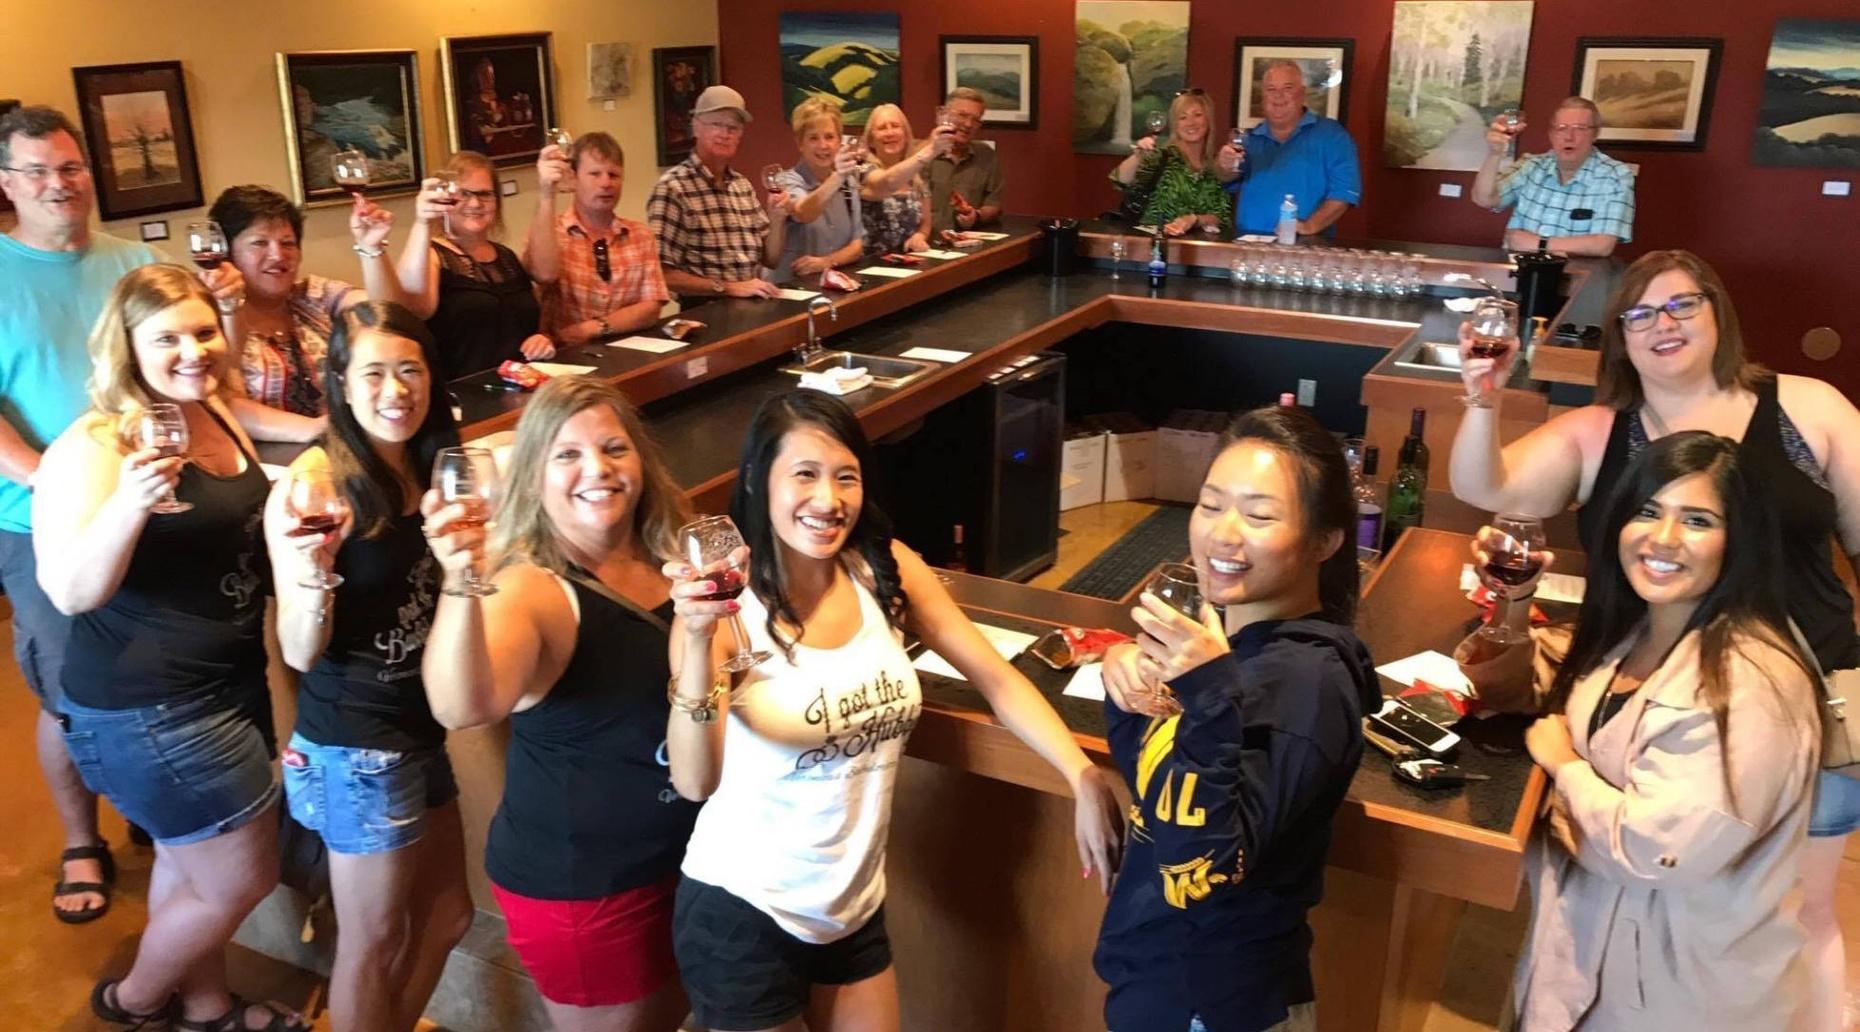 VIP Wine Tasting and Dinner Tour in Branson